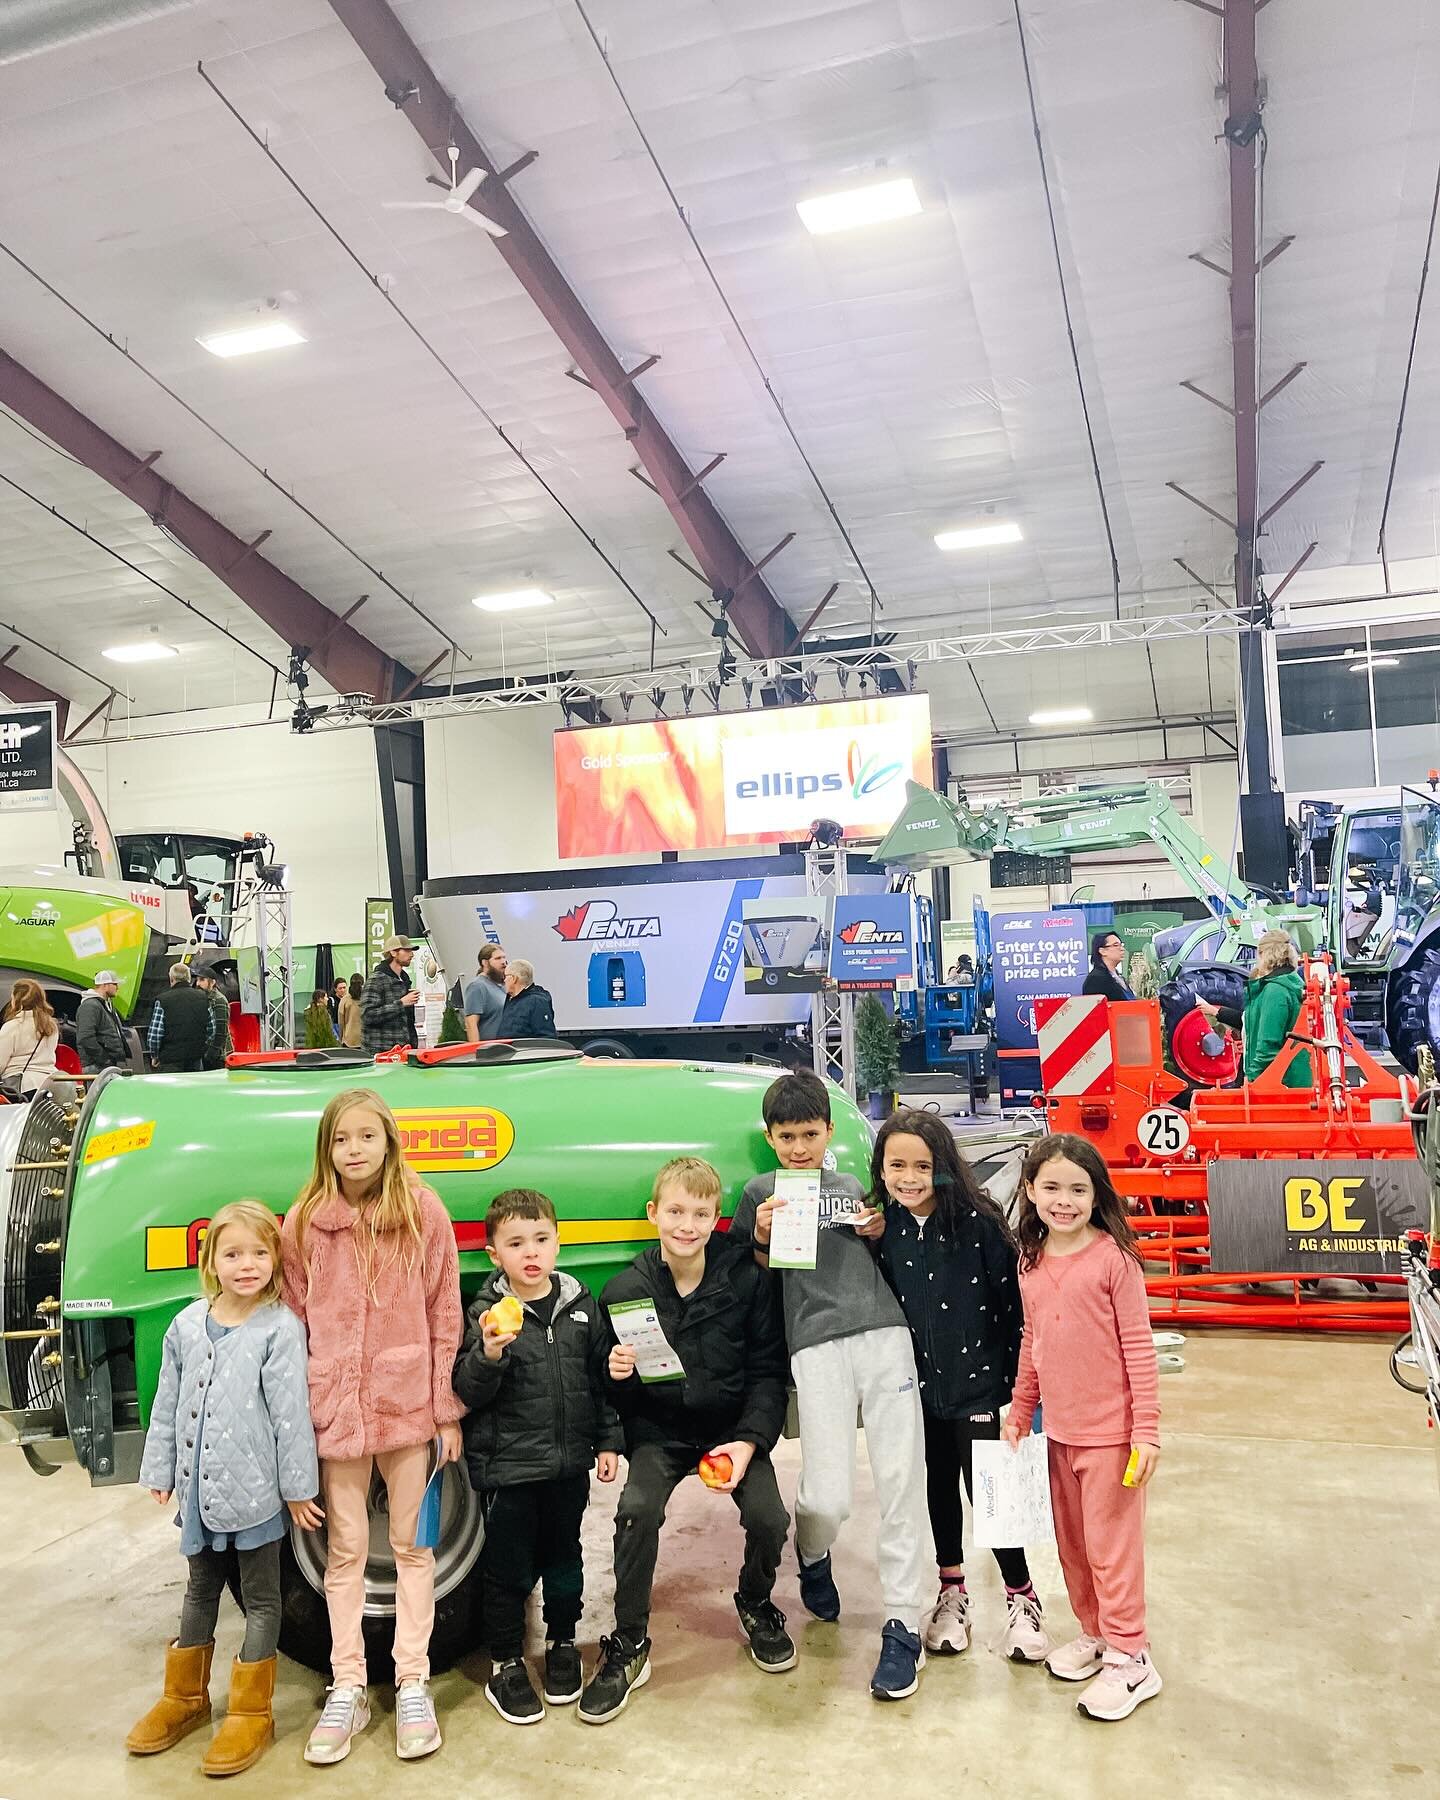 Wishing we were farmers today at the @pacagshow 🚜🐄🌿
So many exhibits to see, huge tractors and machines, a rabbit rescue area filled with bunnies to feed and pet, and a few other animals to pet and see. 
We were first timers to see it all and our 